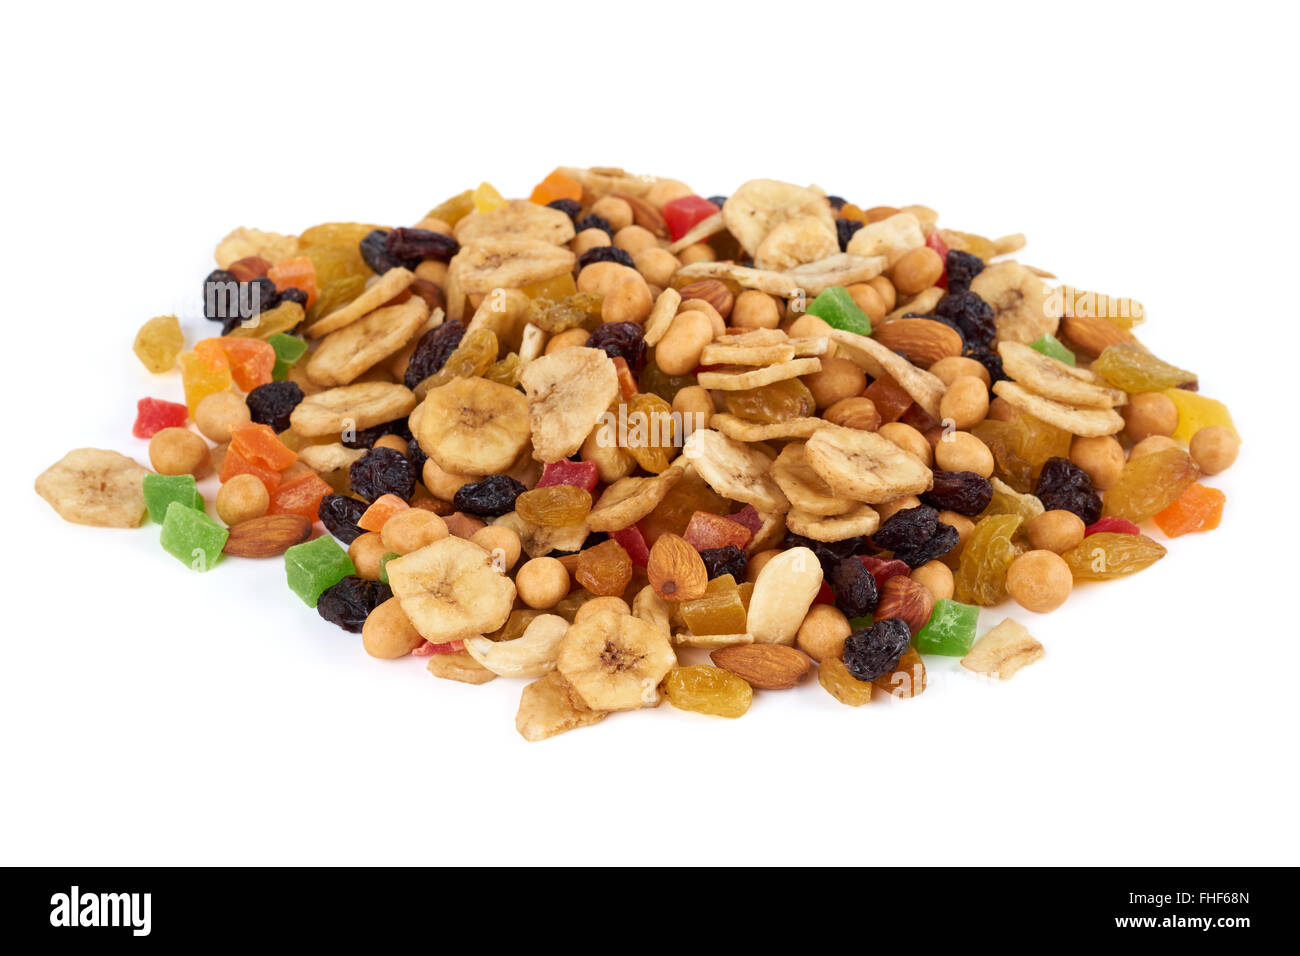 Heap of dried fruits and nuts isolated on white Stock Photo